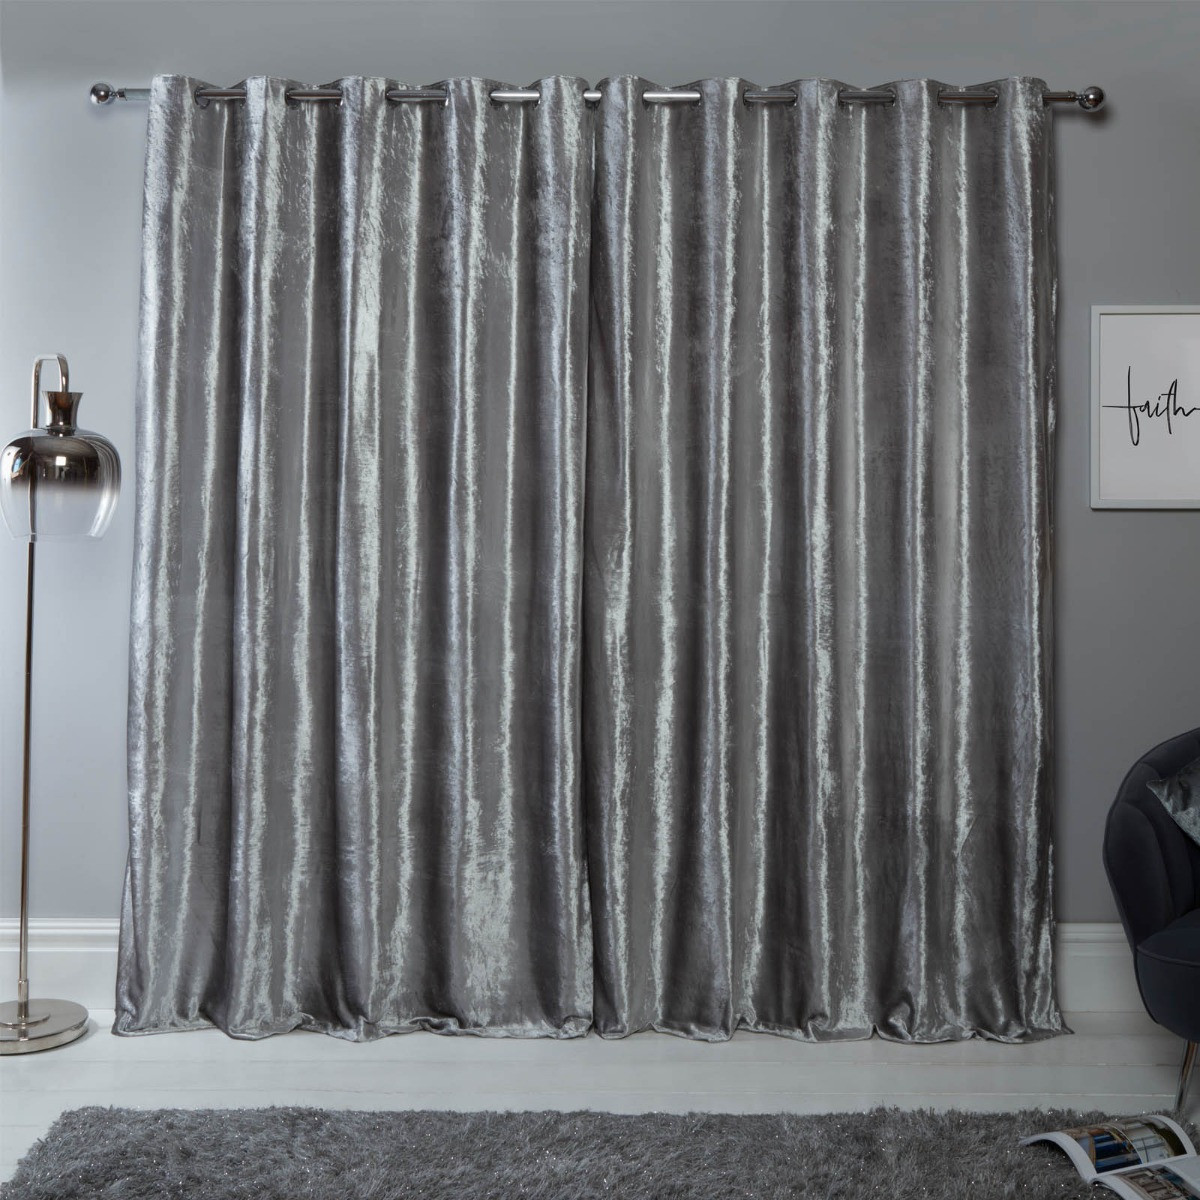 Sienna Home Crushed Velvet Eyelet Curtains - Silver 66" x 90">